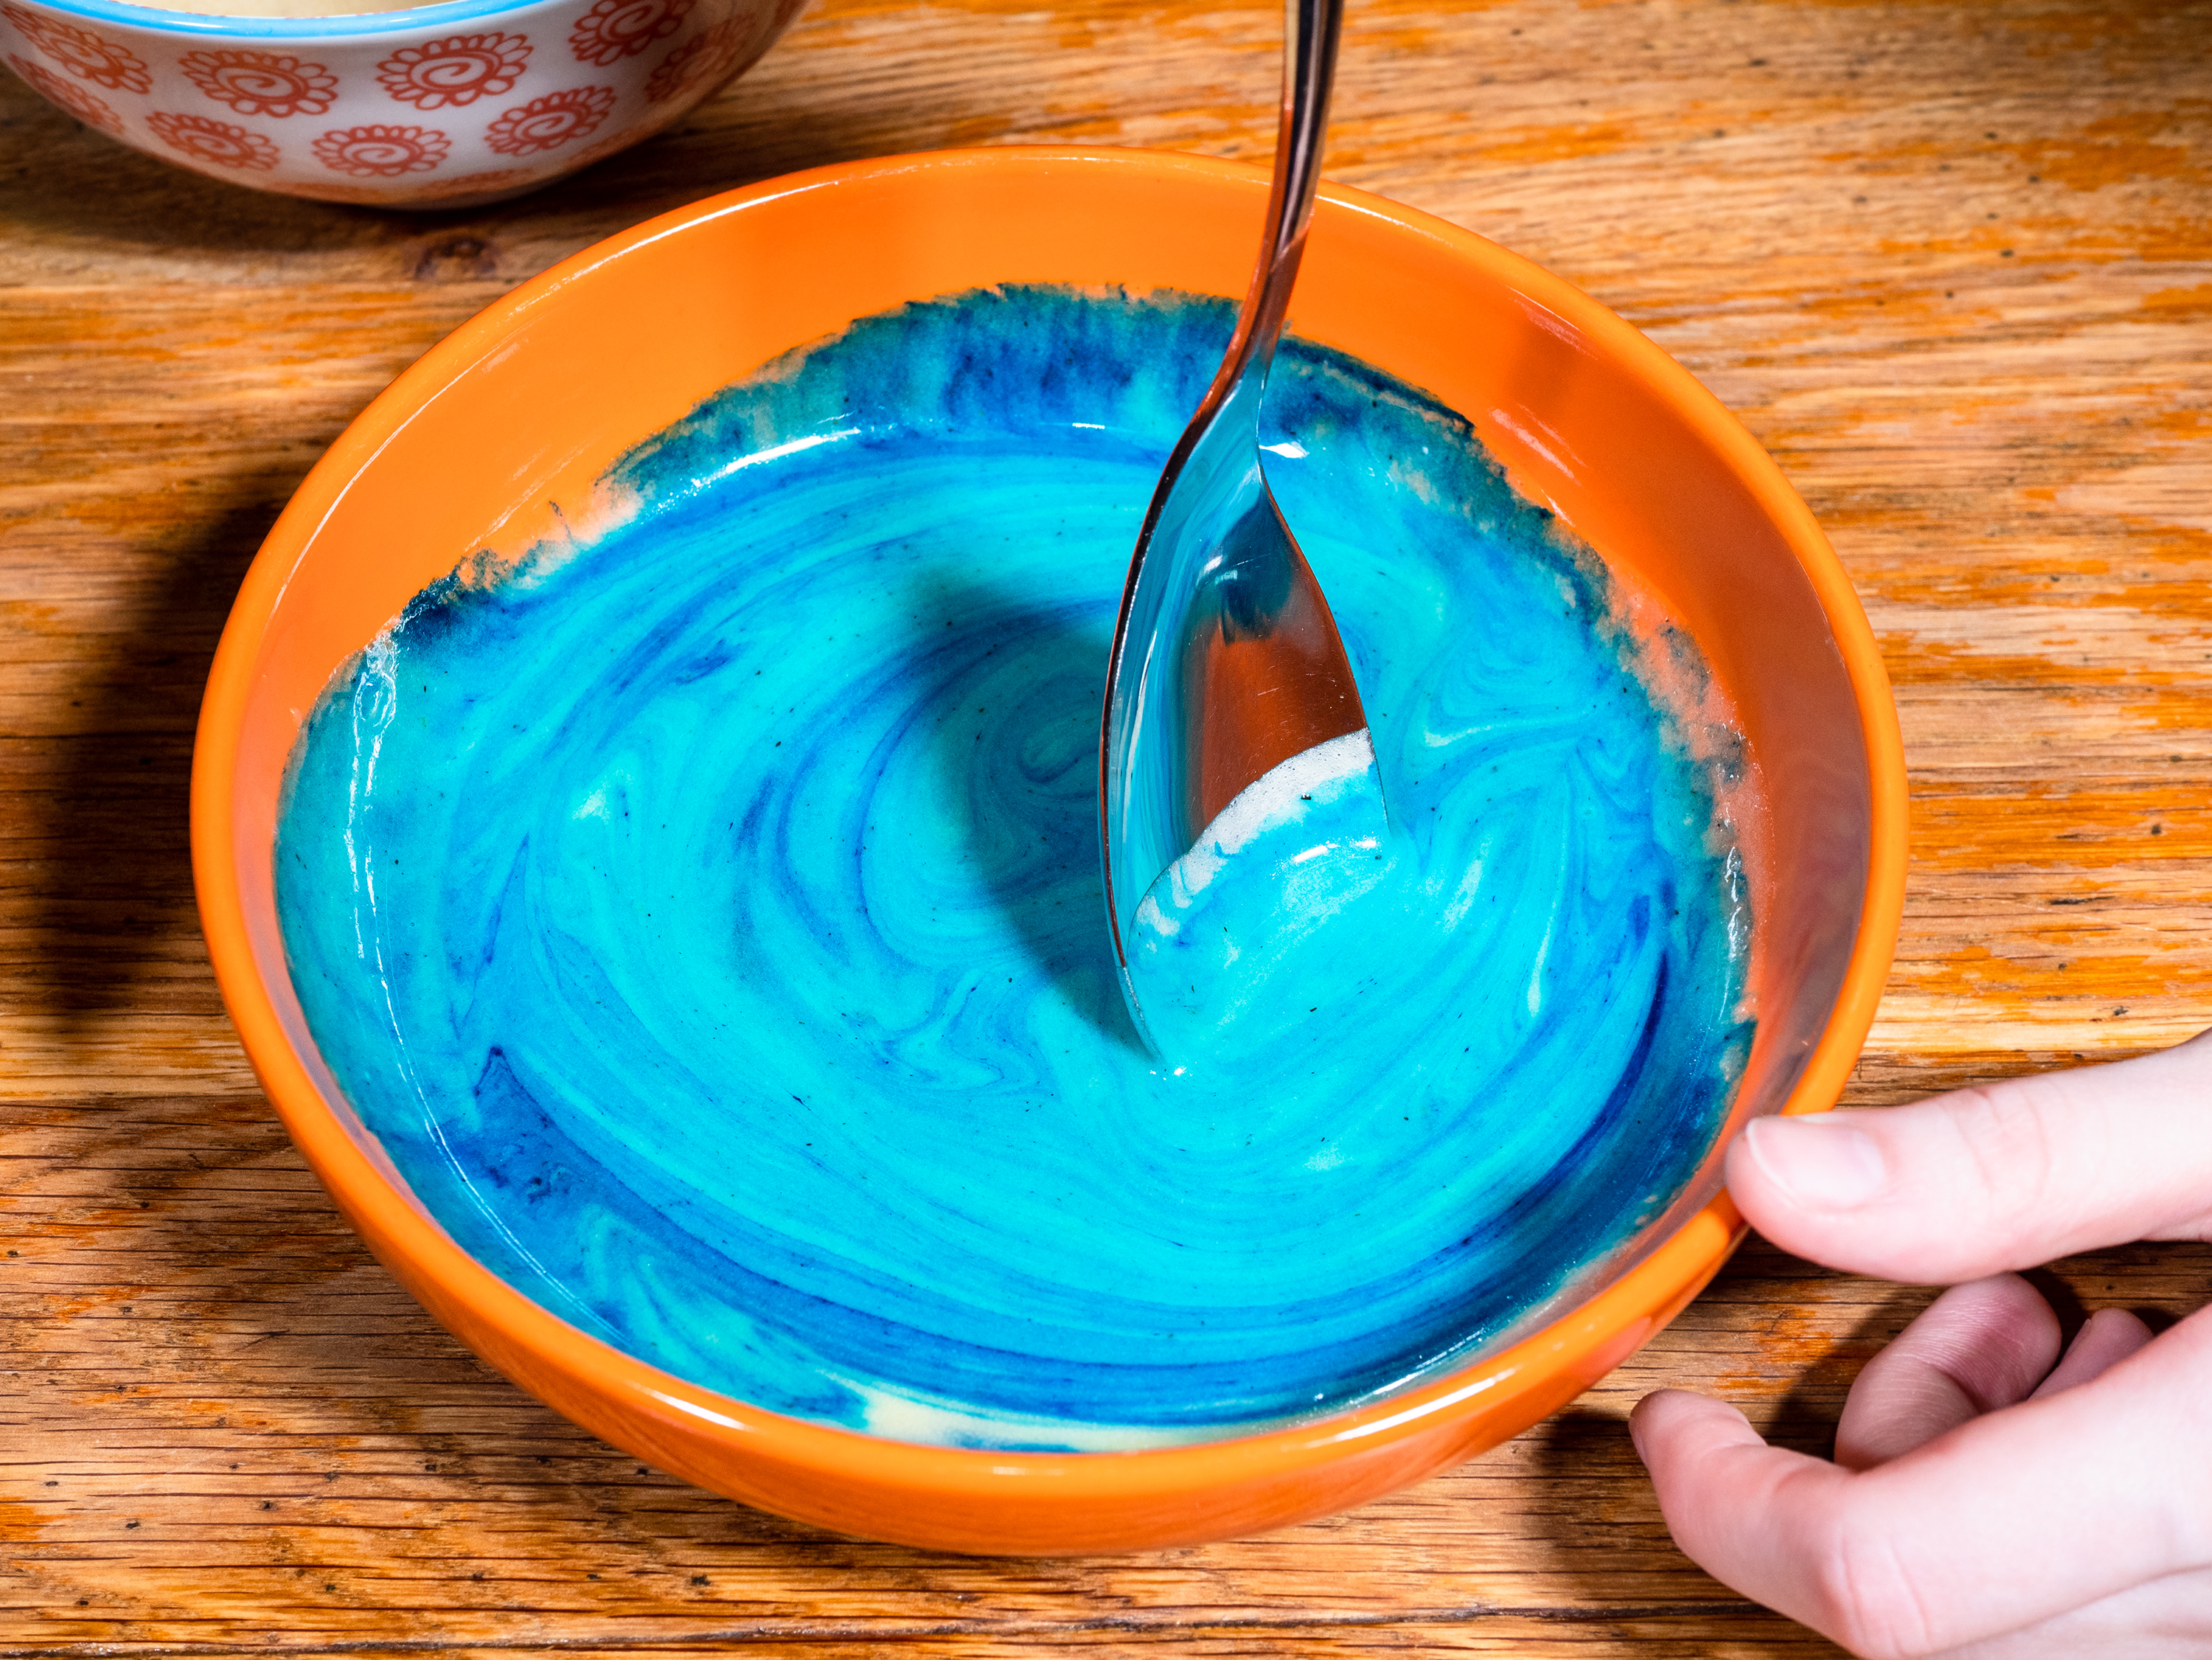 mixing baking soda with blue food coloring in bowl to make paint